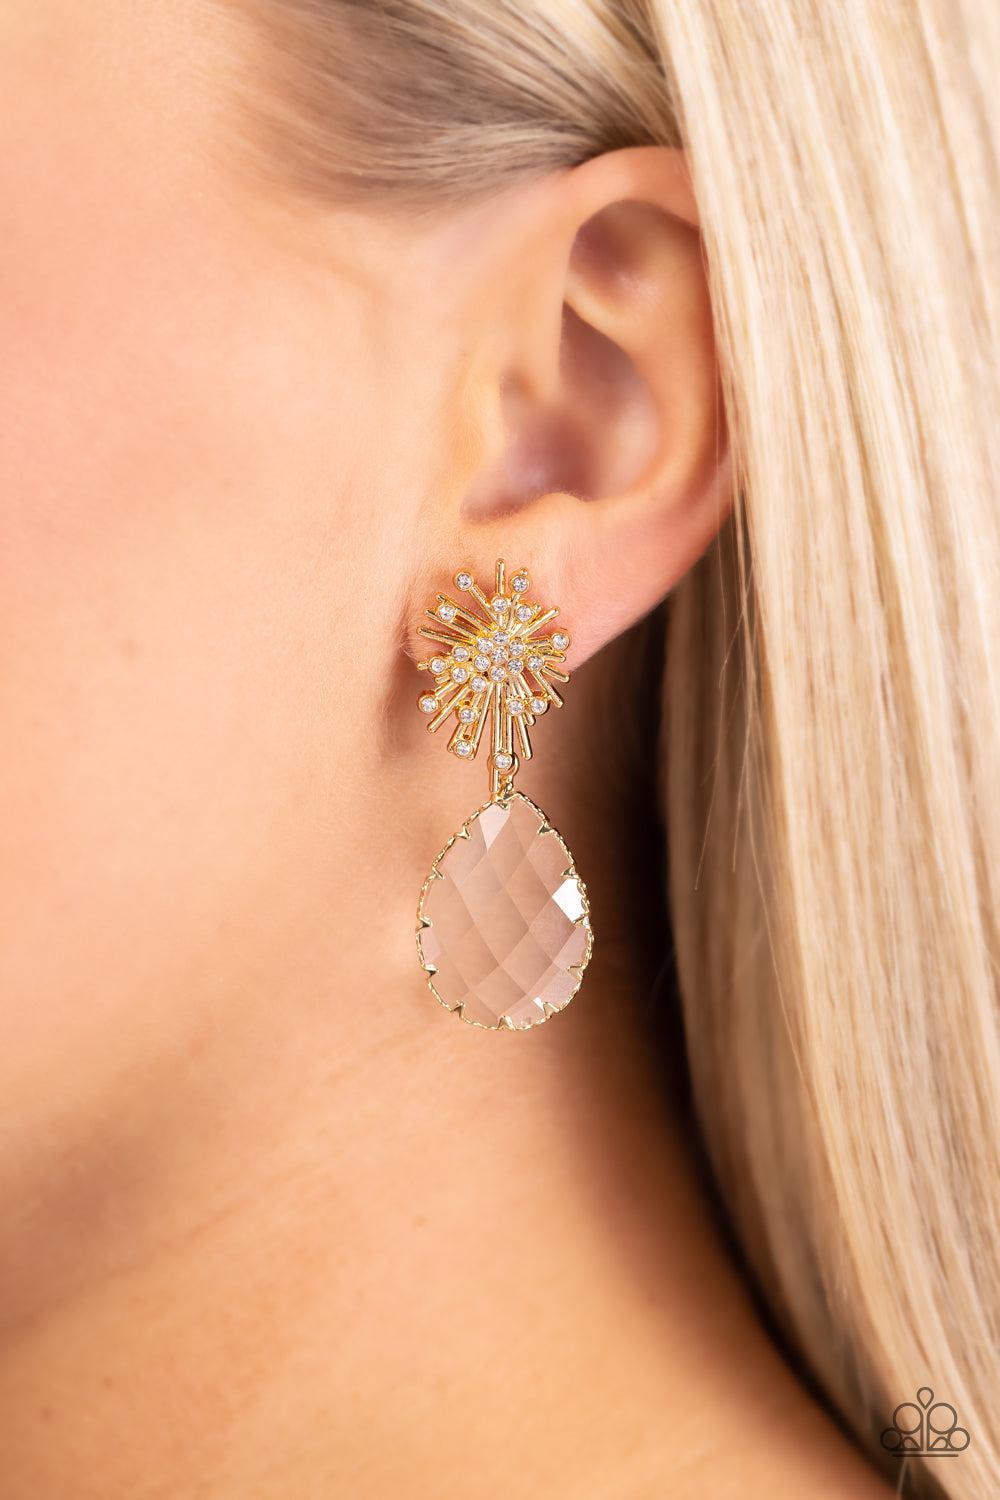 Stellar Shooting Star Gold &amp; White Gem Earrings - Paparazzi Accessories-on model - CarasShop.com - $5 Jewelry by Cara Jewels